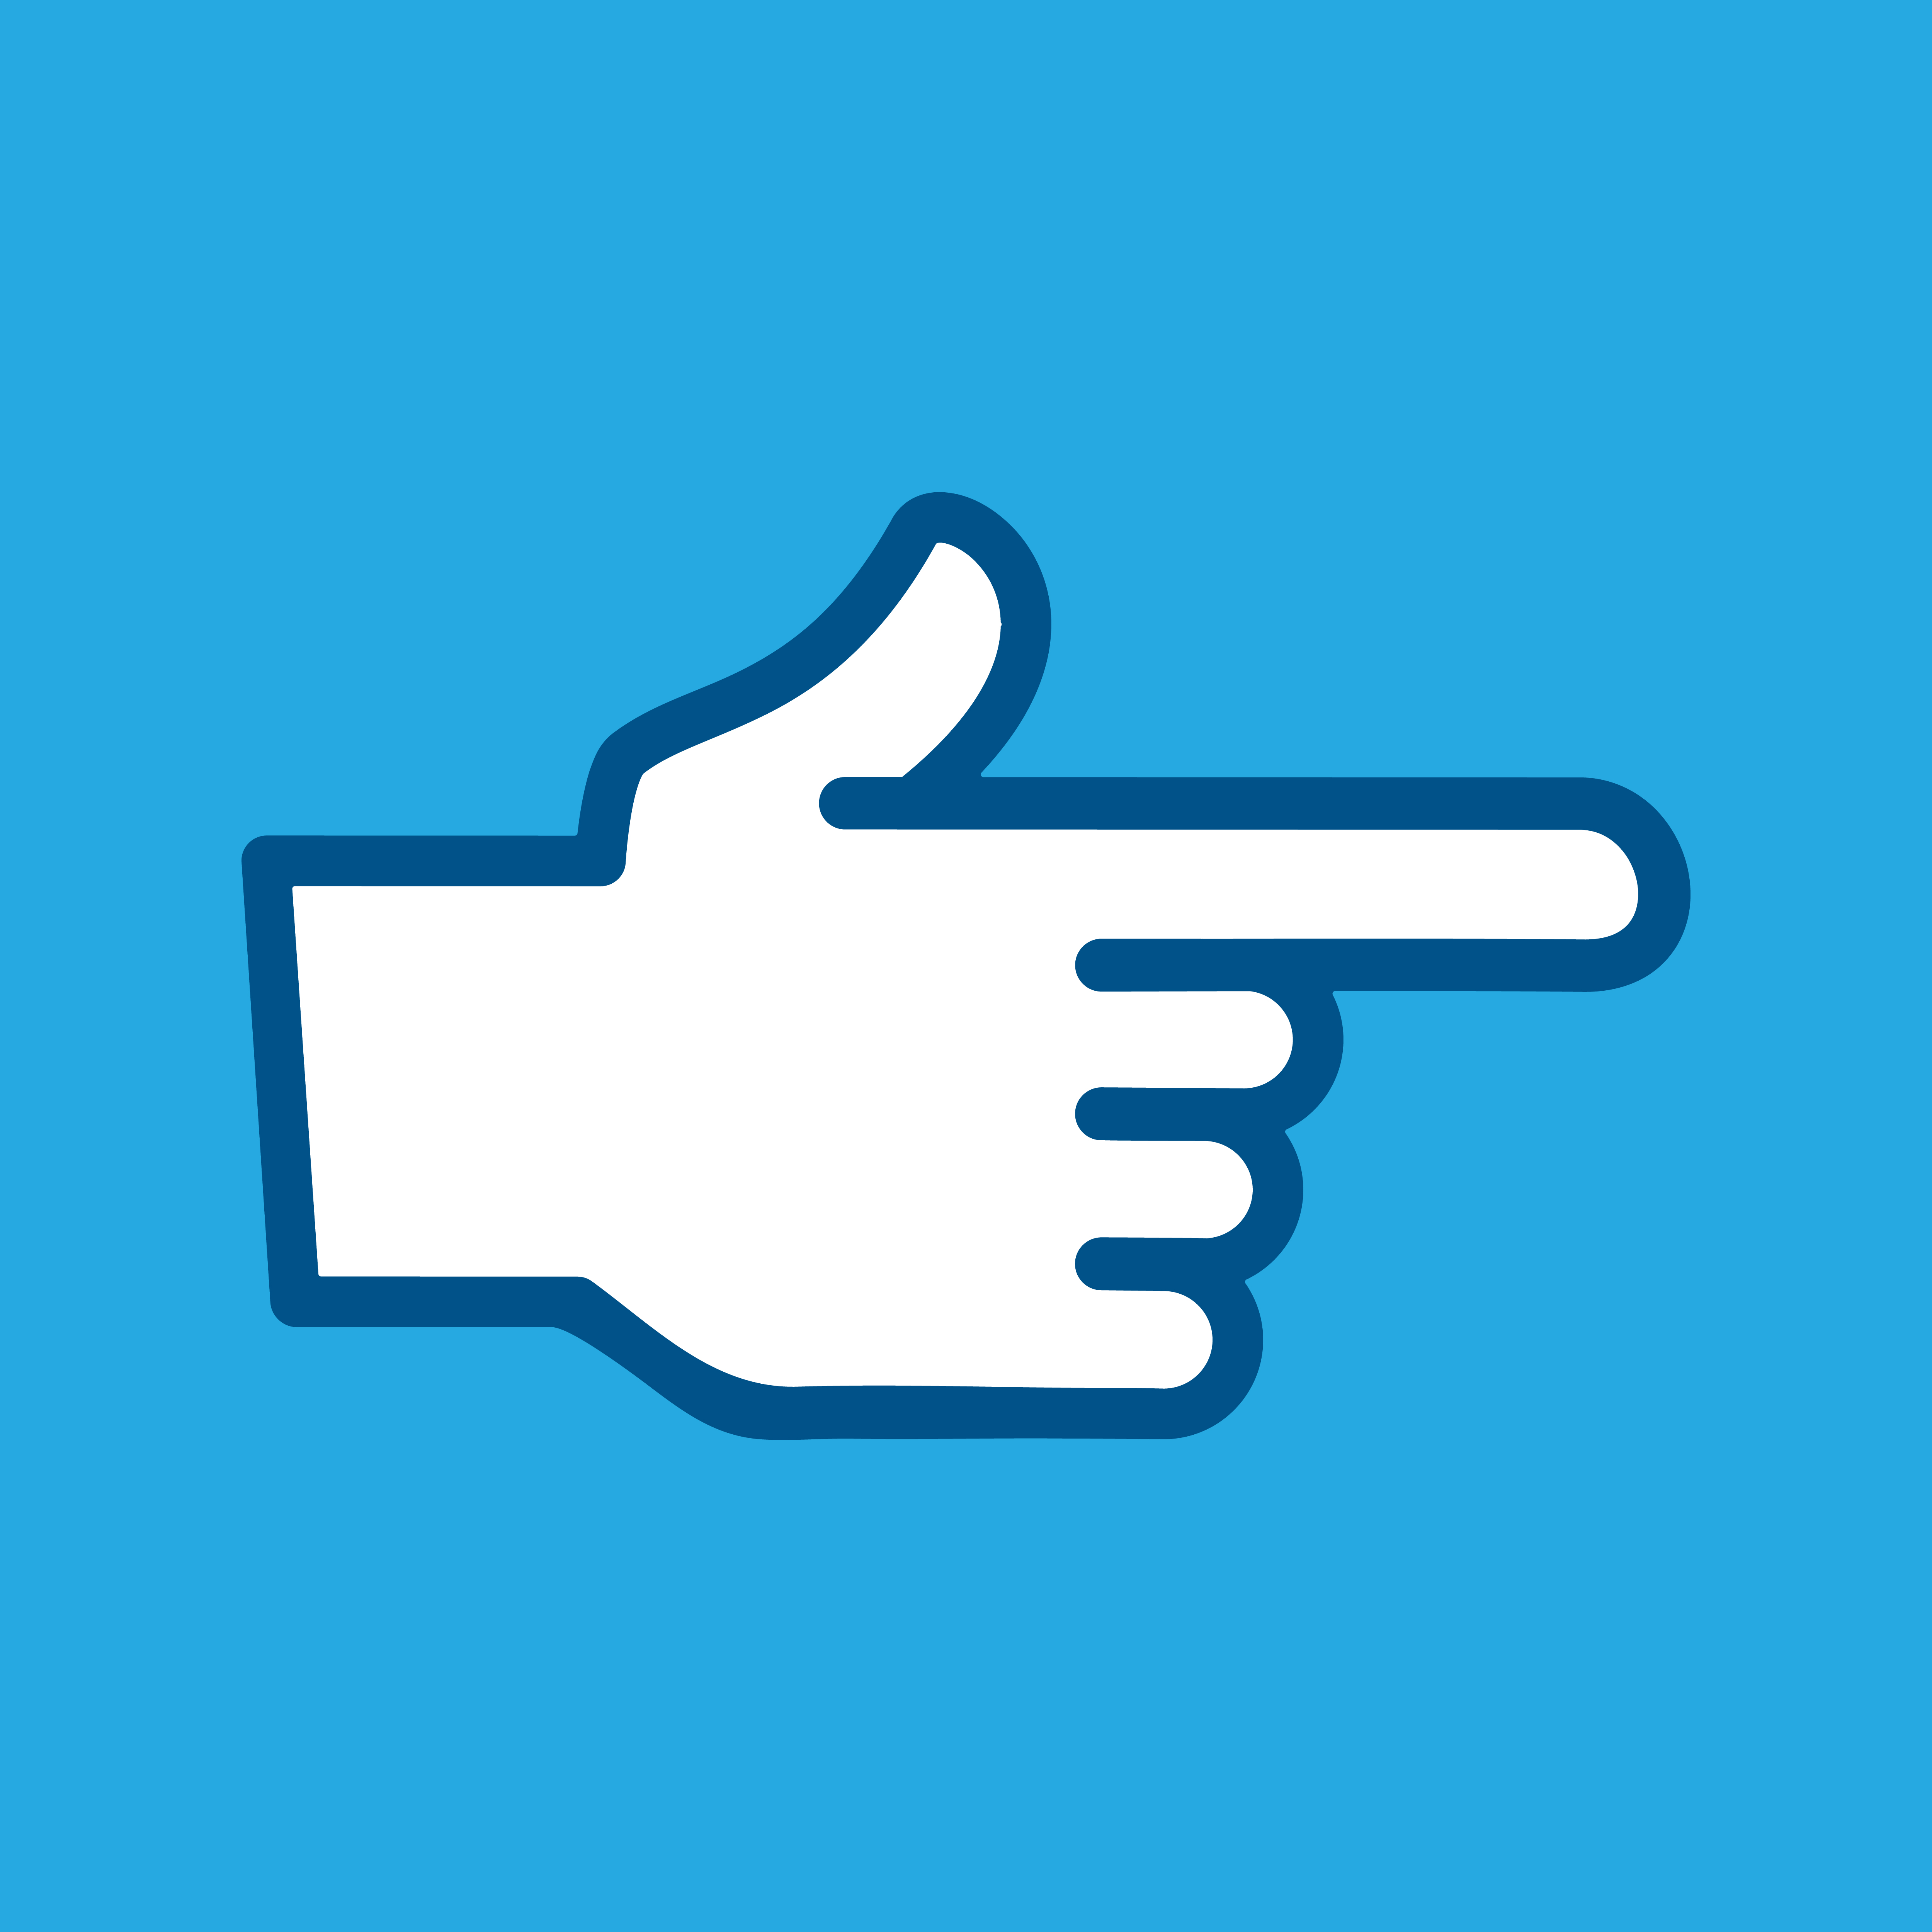 Download Finger Point Vector Icon - Download Free Vectors, Clipart ...